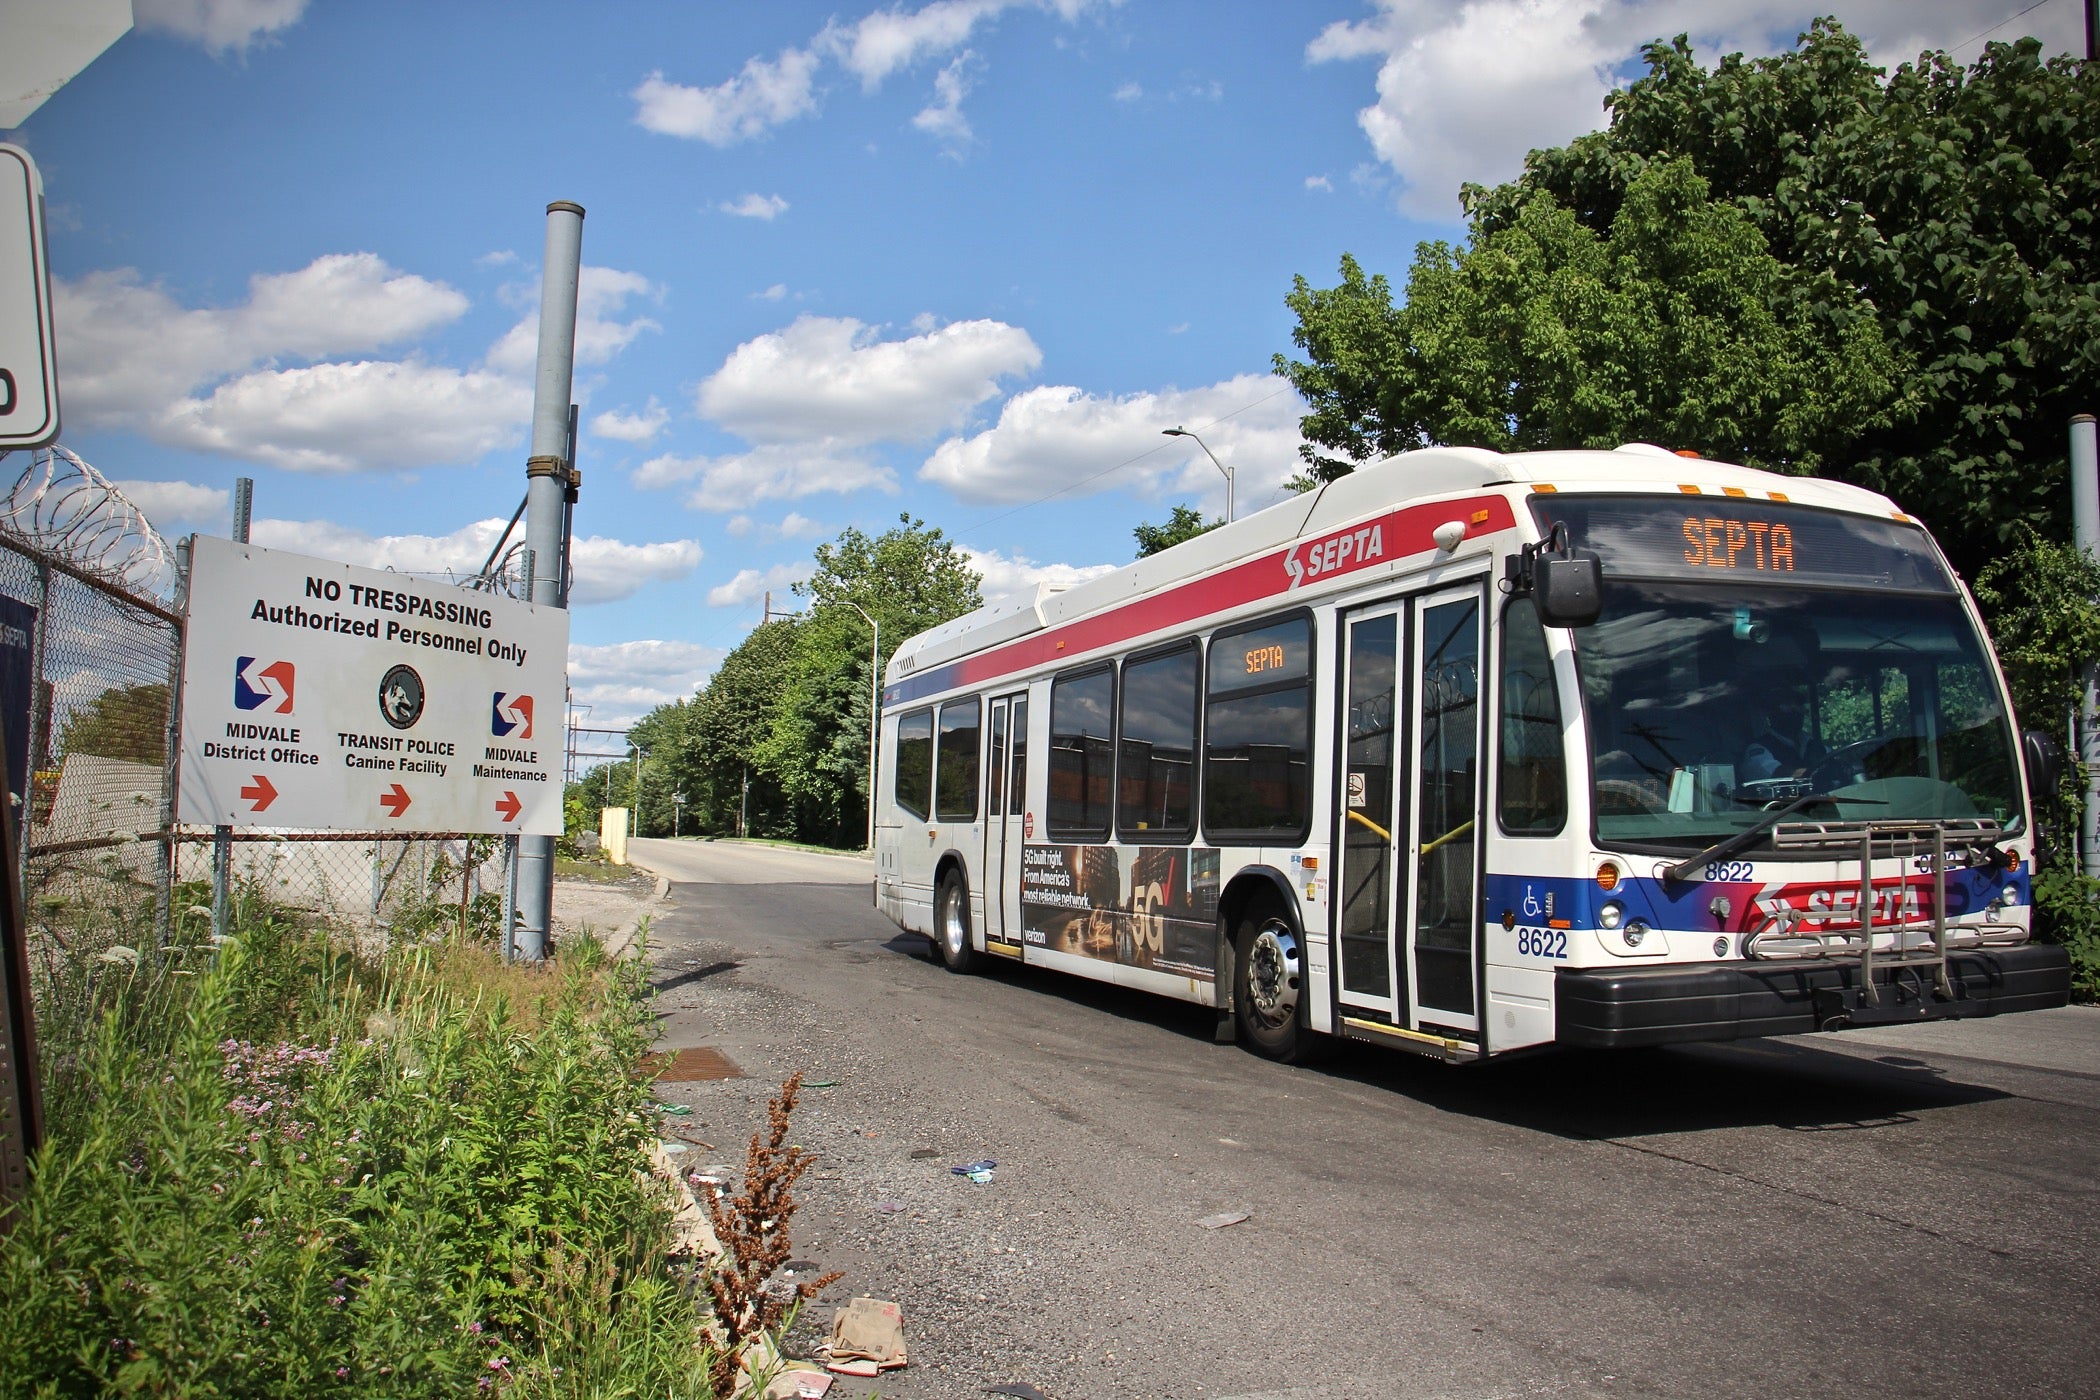 SEPTA plans to cut bus routes to improve on-time service - WHYY